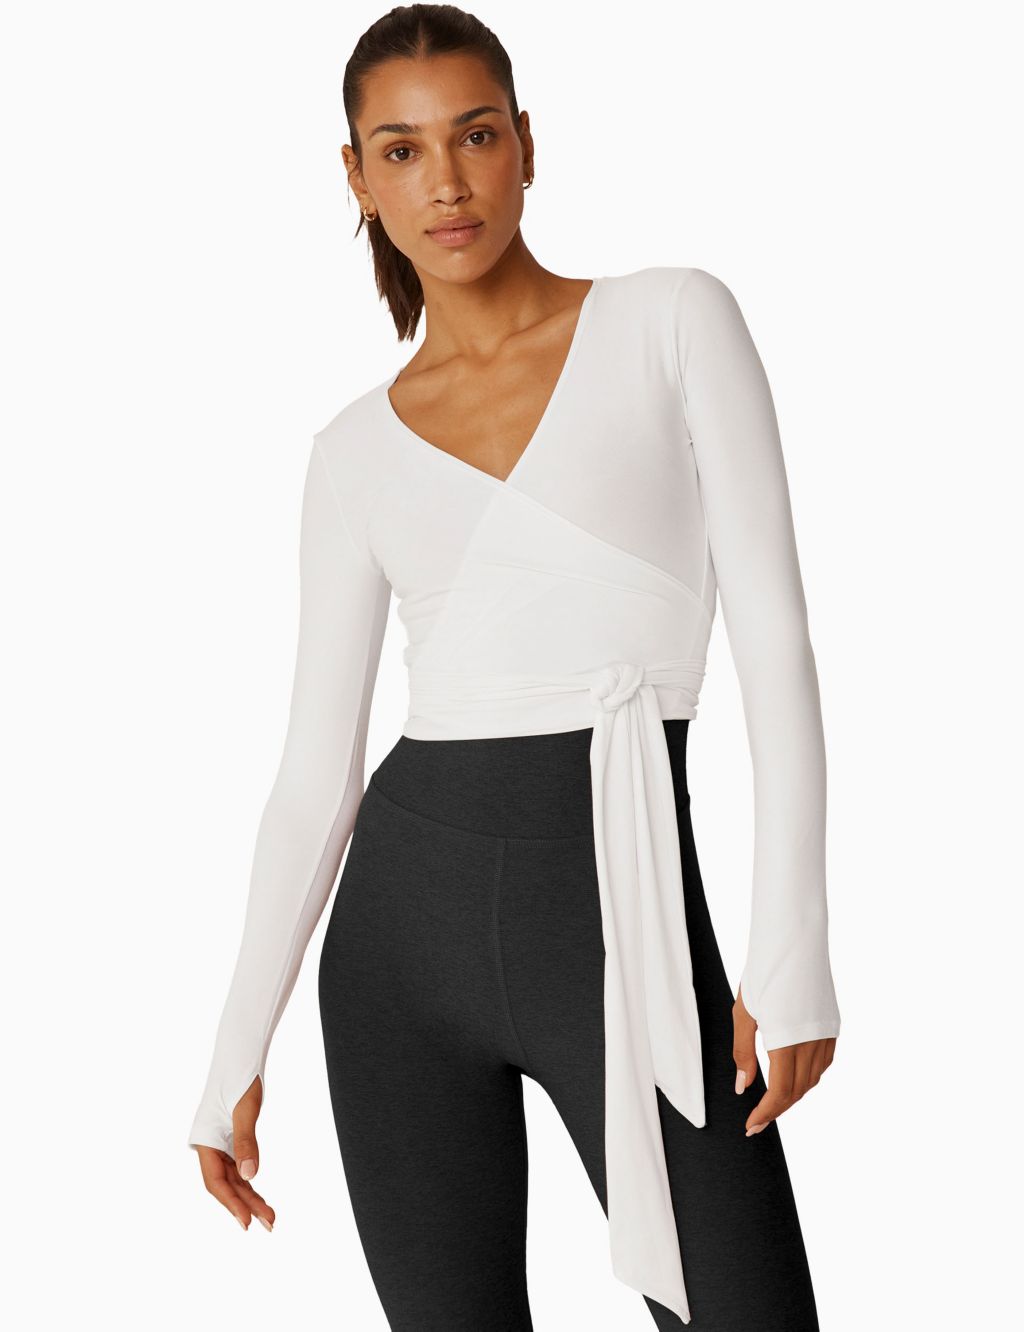 Featherweight Waist No Time Wrap Front Top